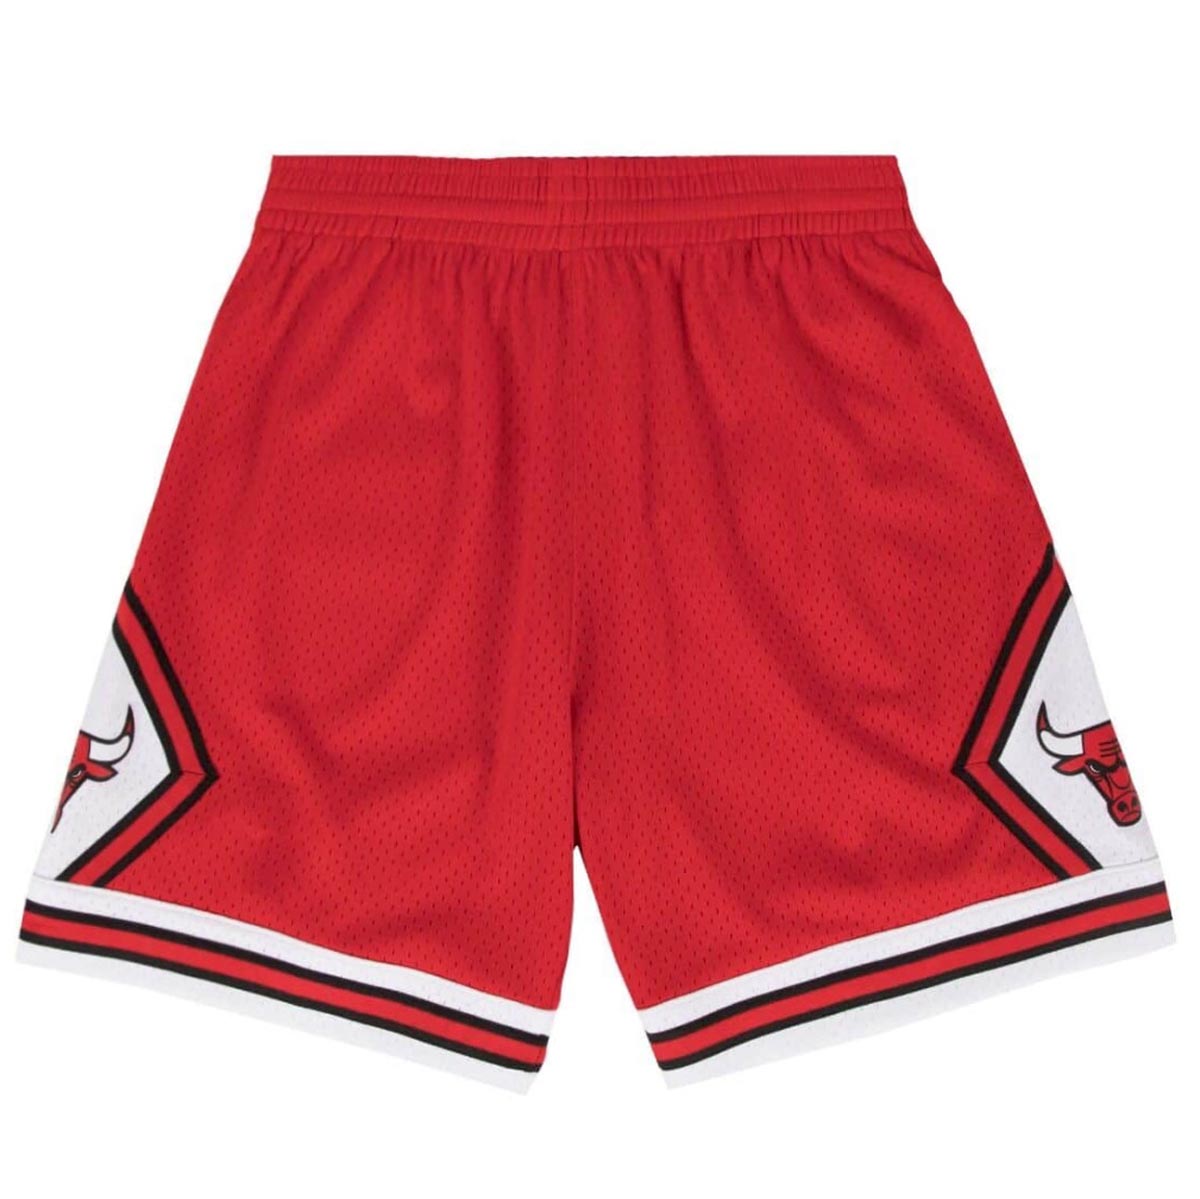 Mitchell & Ness x NBA Roses And Banners Bulls Shorts - Scarlet image 2